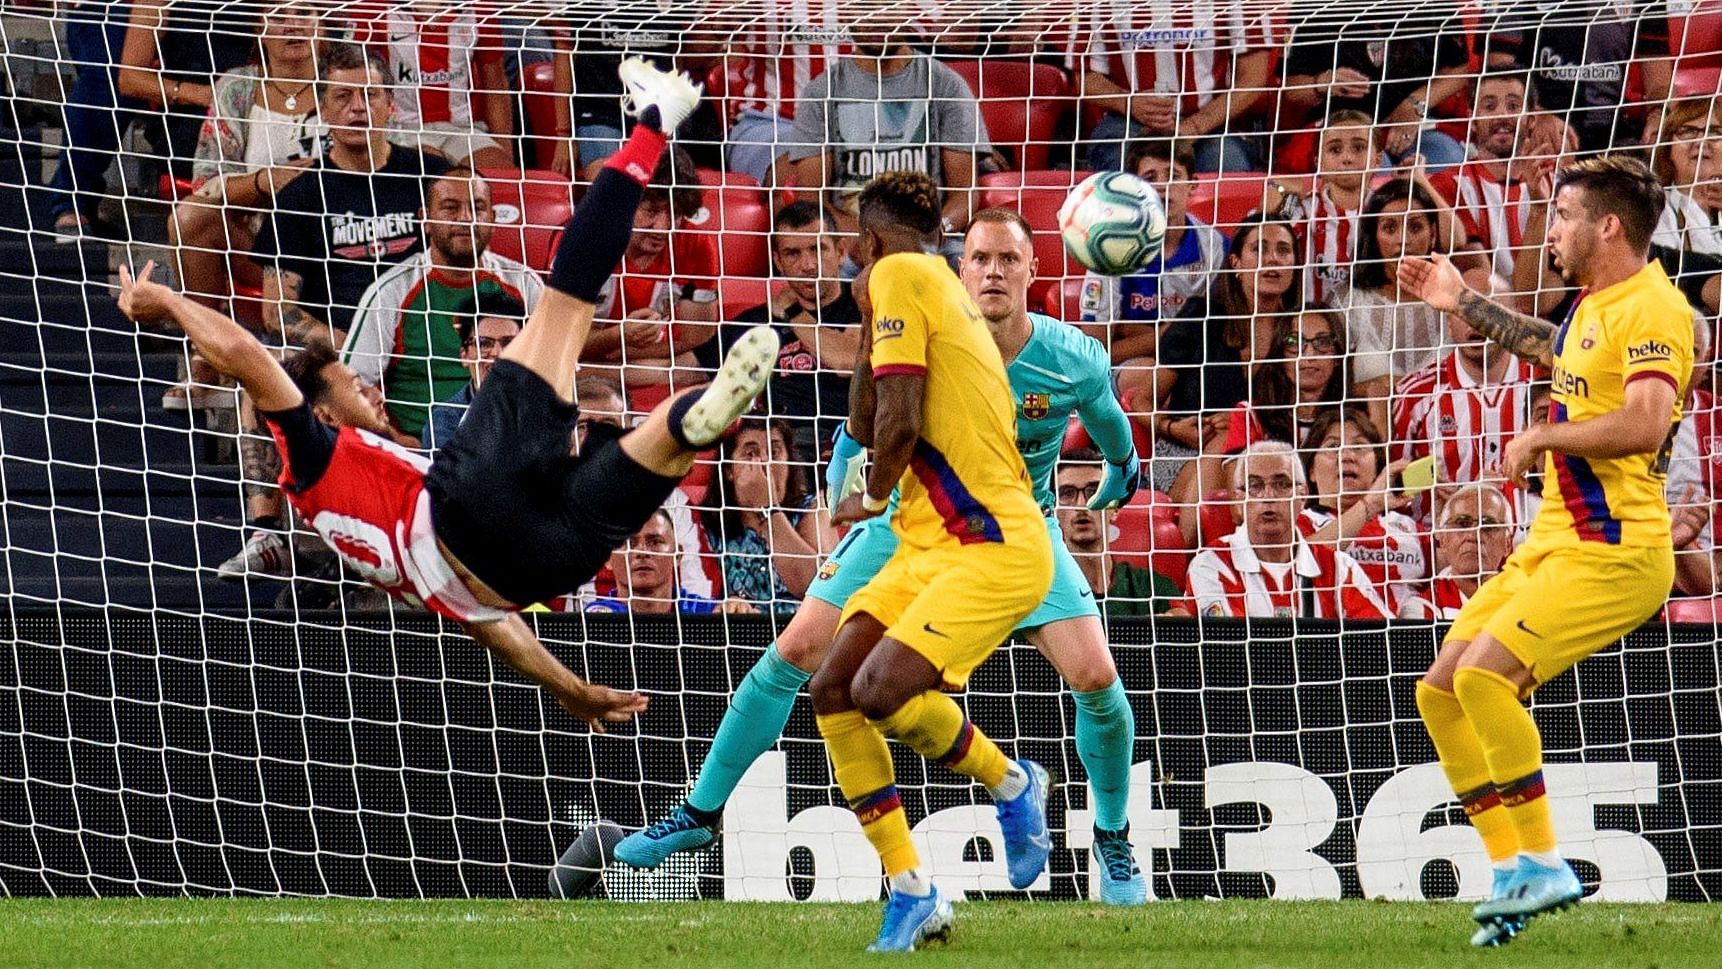 Aritz Aduriz threw himself into the air and acrobatically volleyed past Marc-Andre ter Stegen to score the winner.